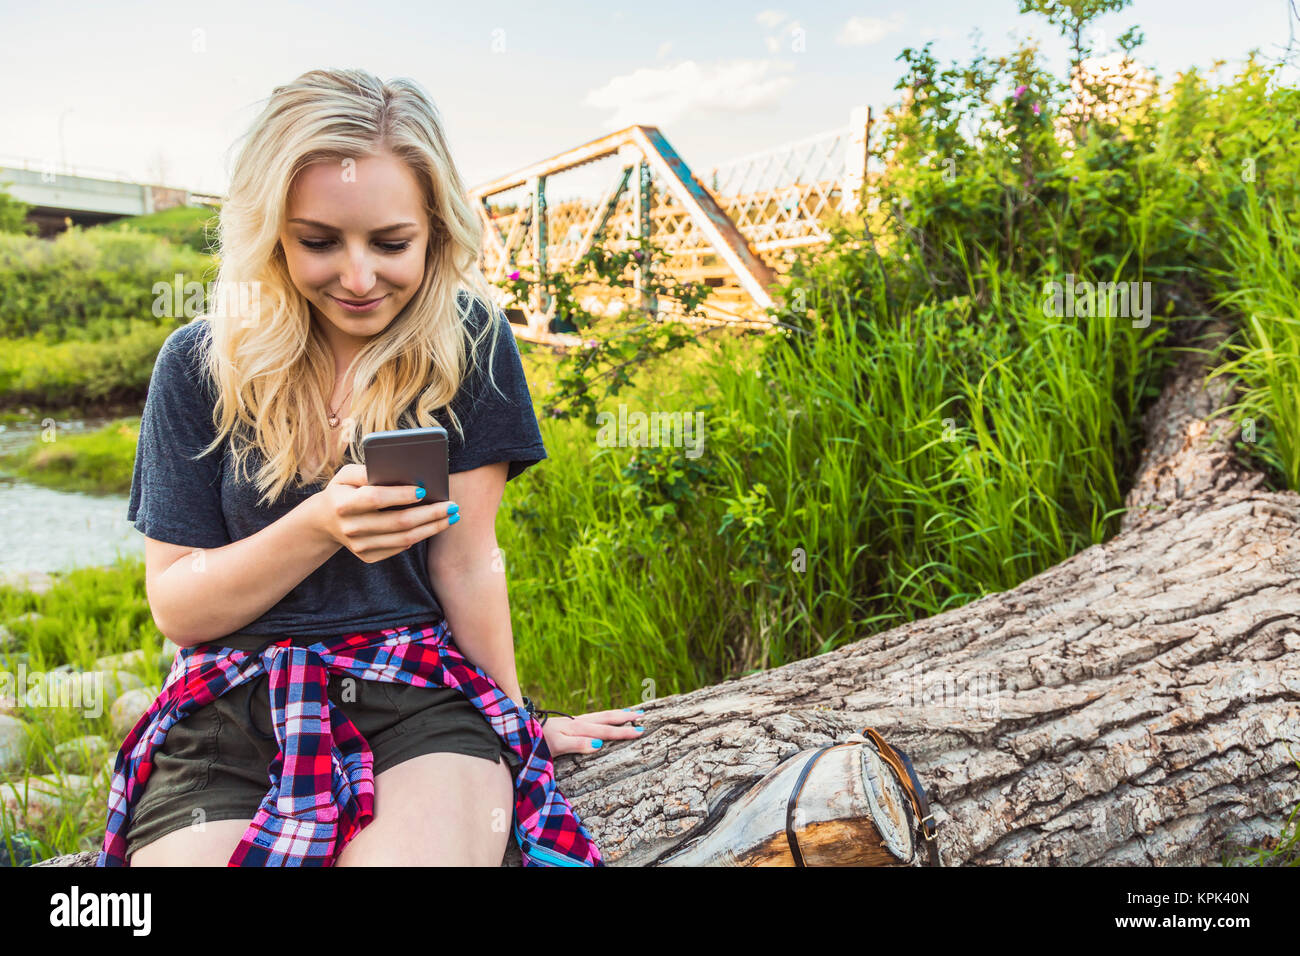 A young woman sits on log in a park using her cell phone with a river and bridge in the background; Edmonton, Alberta, Canada Stock Photo